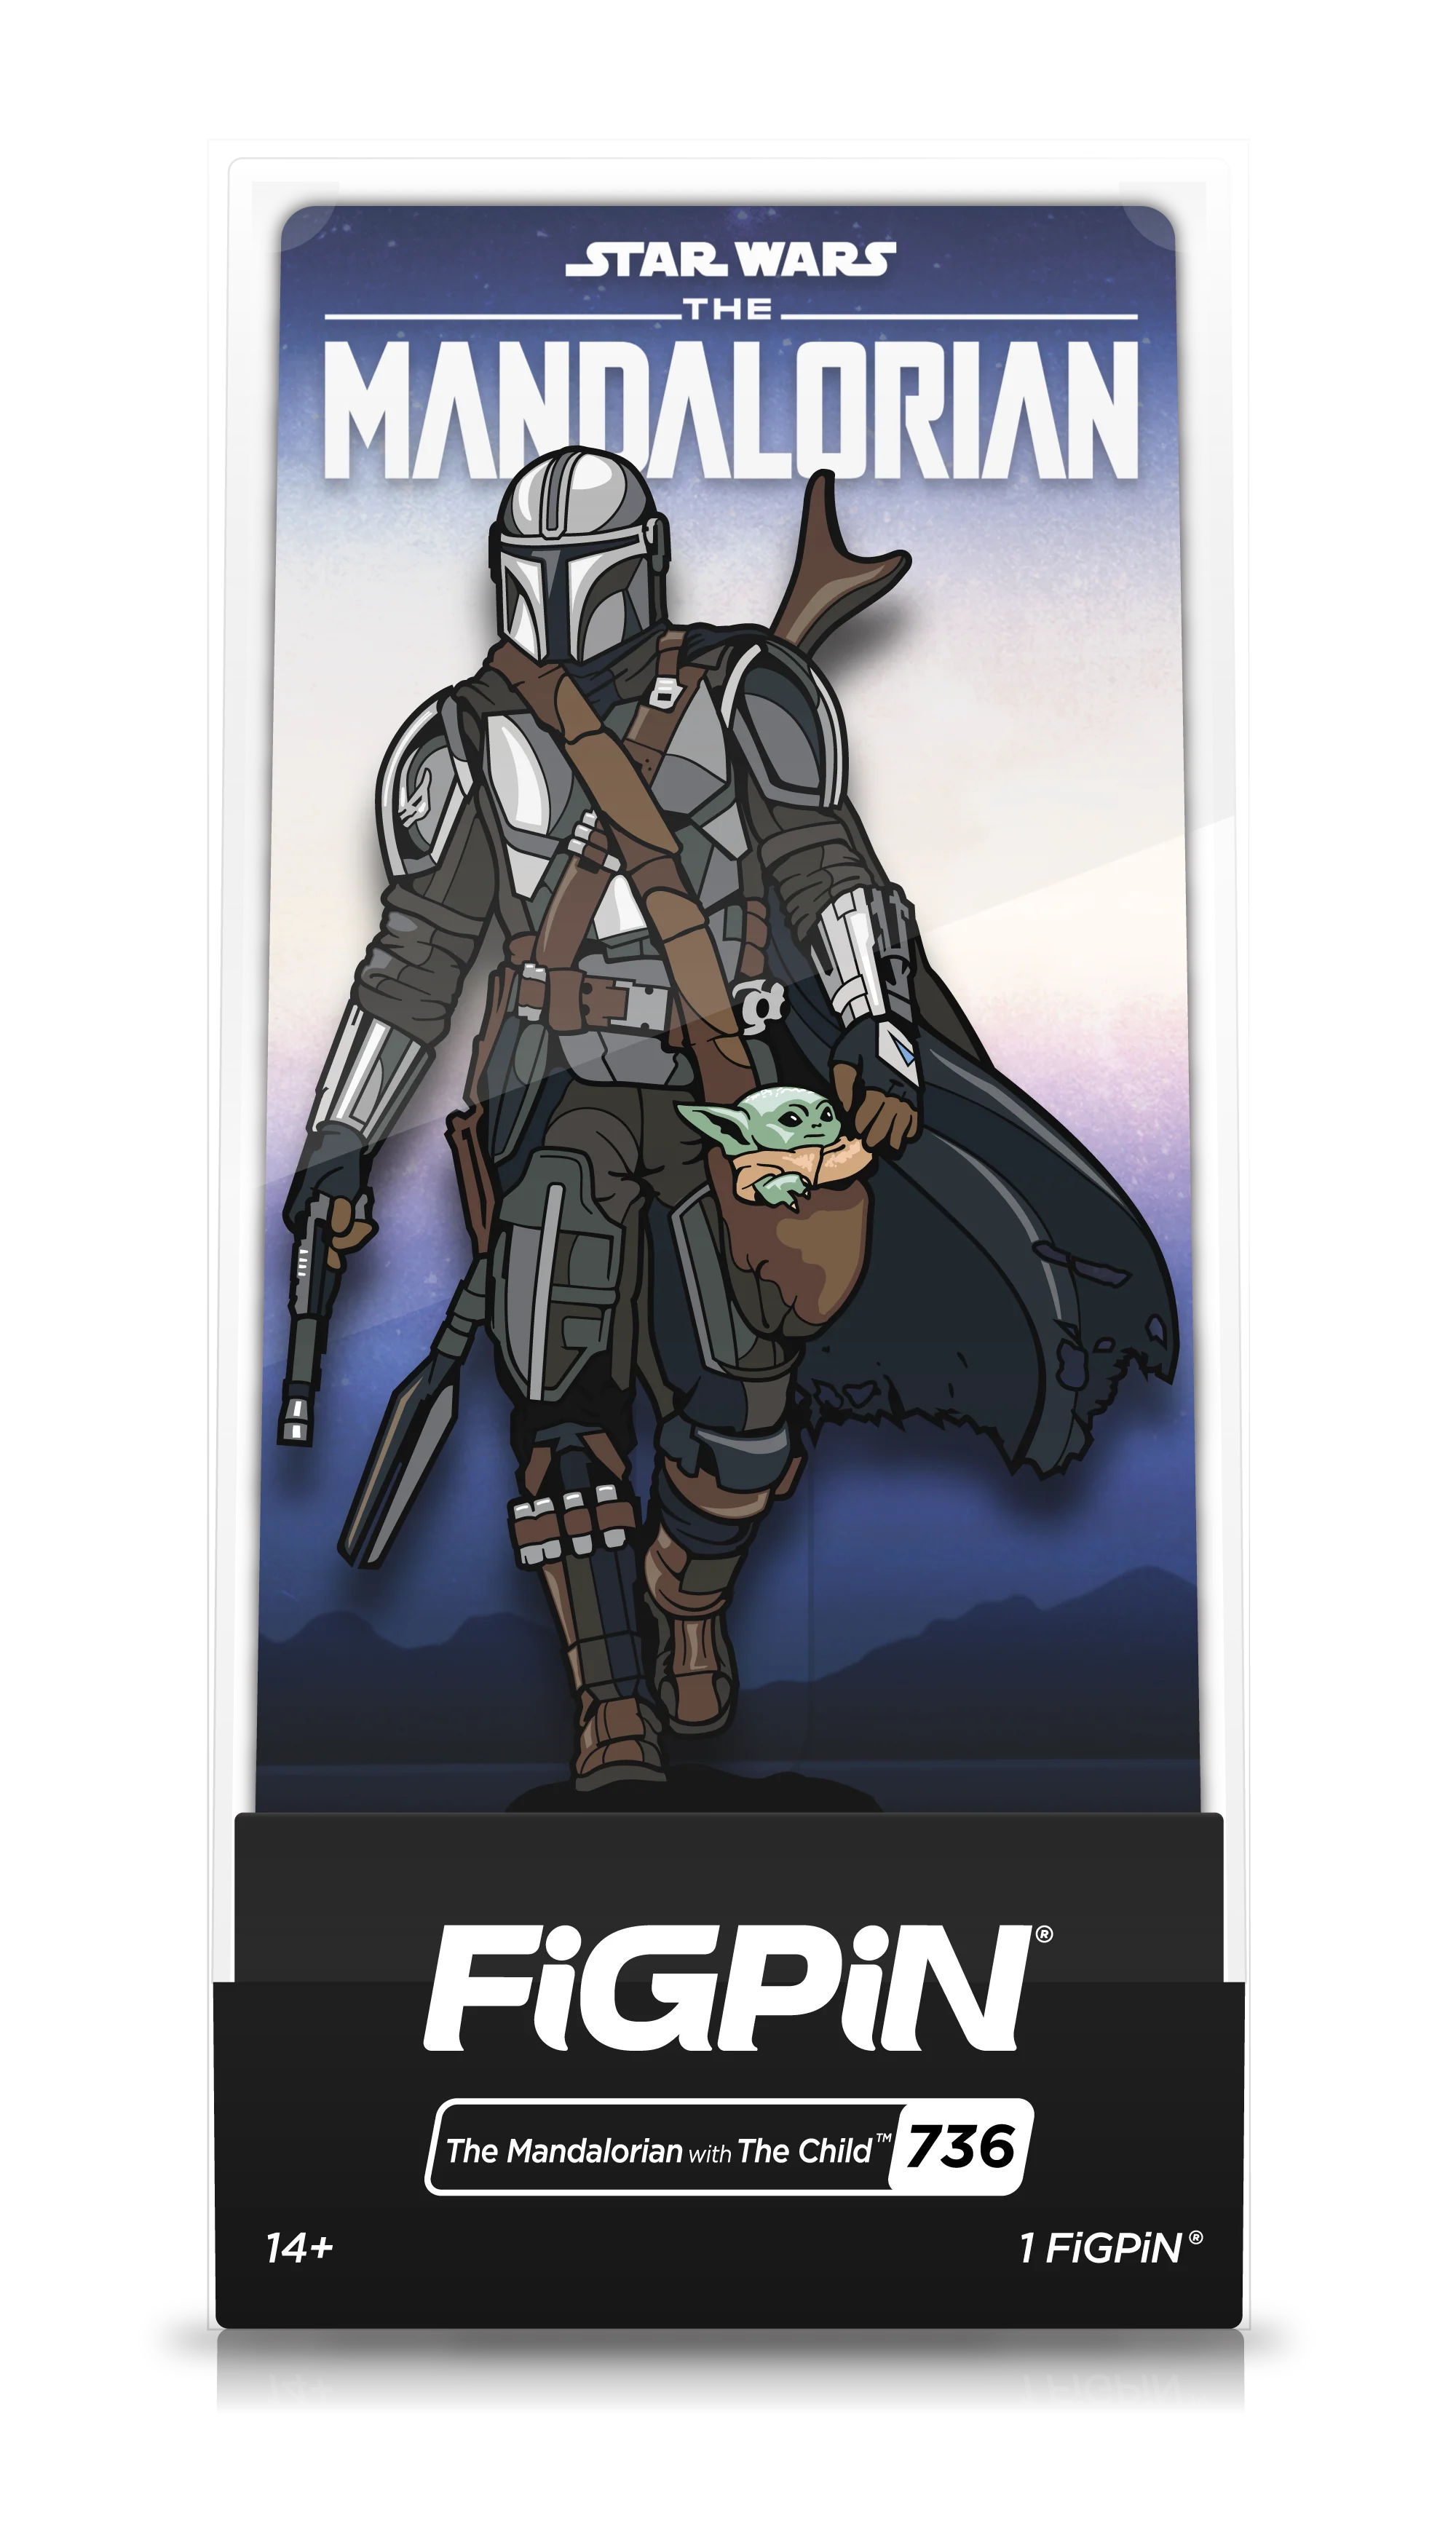 FiGPiN Star Wars The Mandalorian with The Child (736)